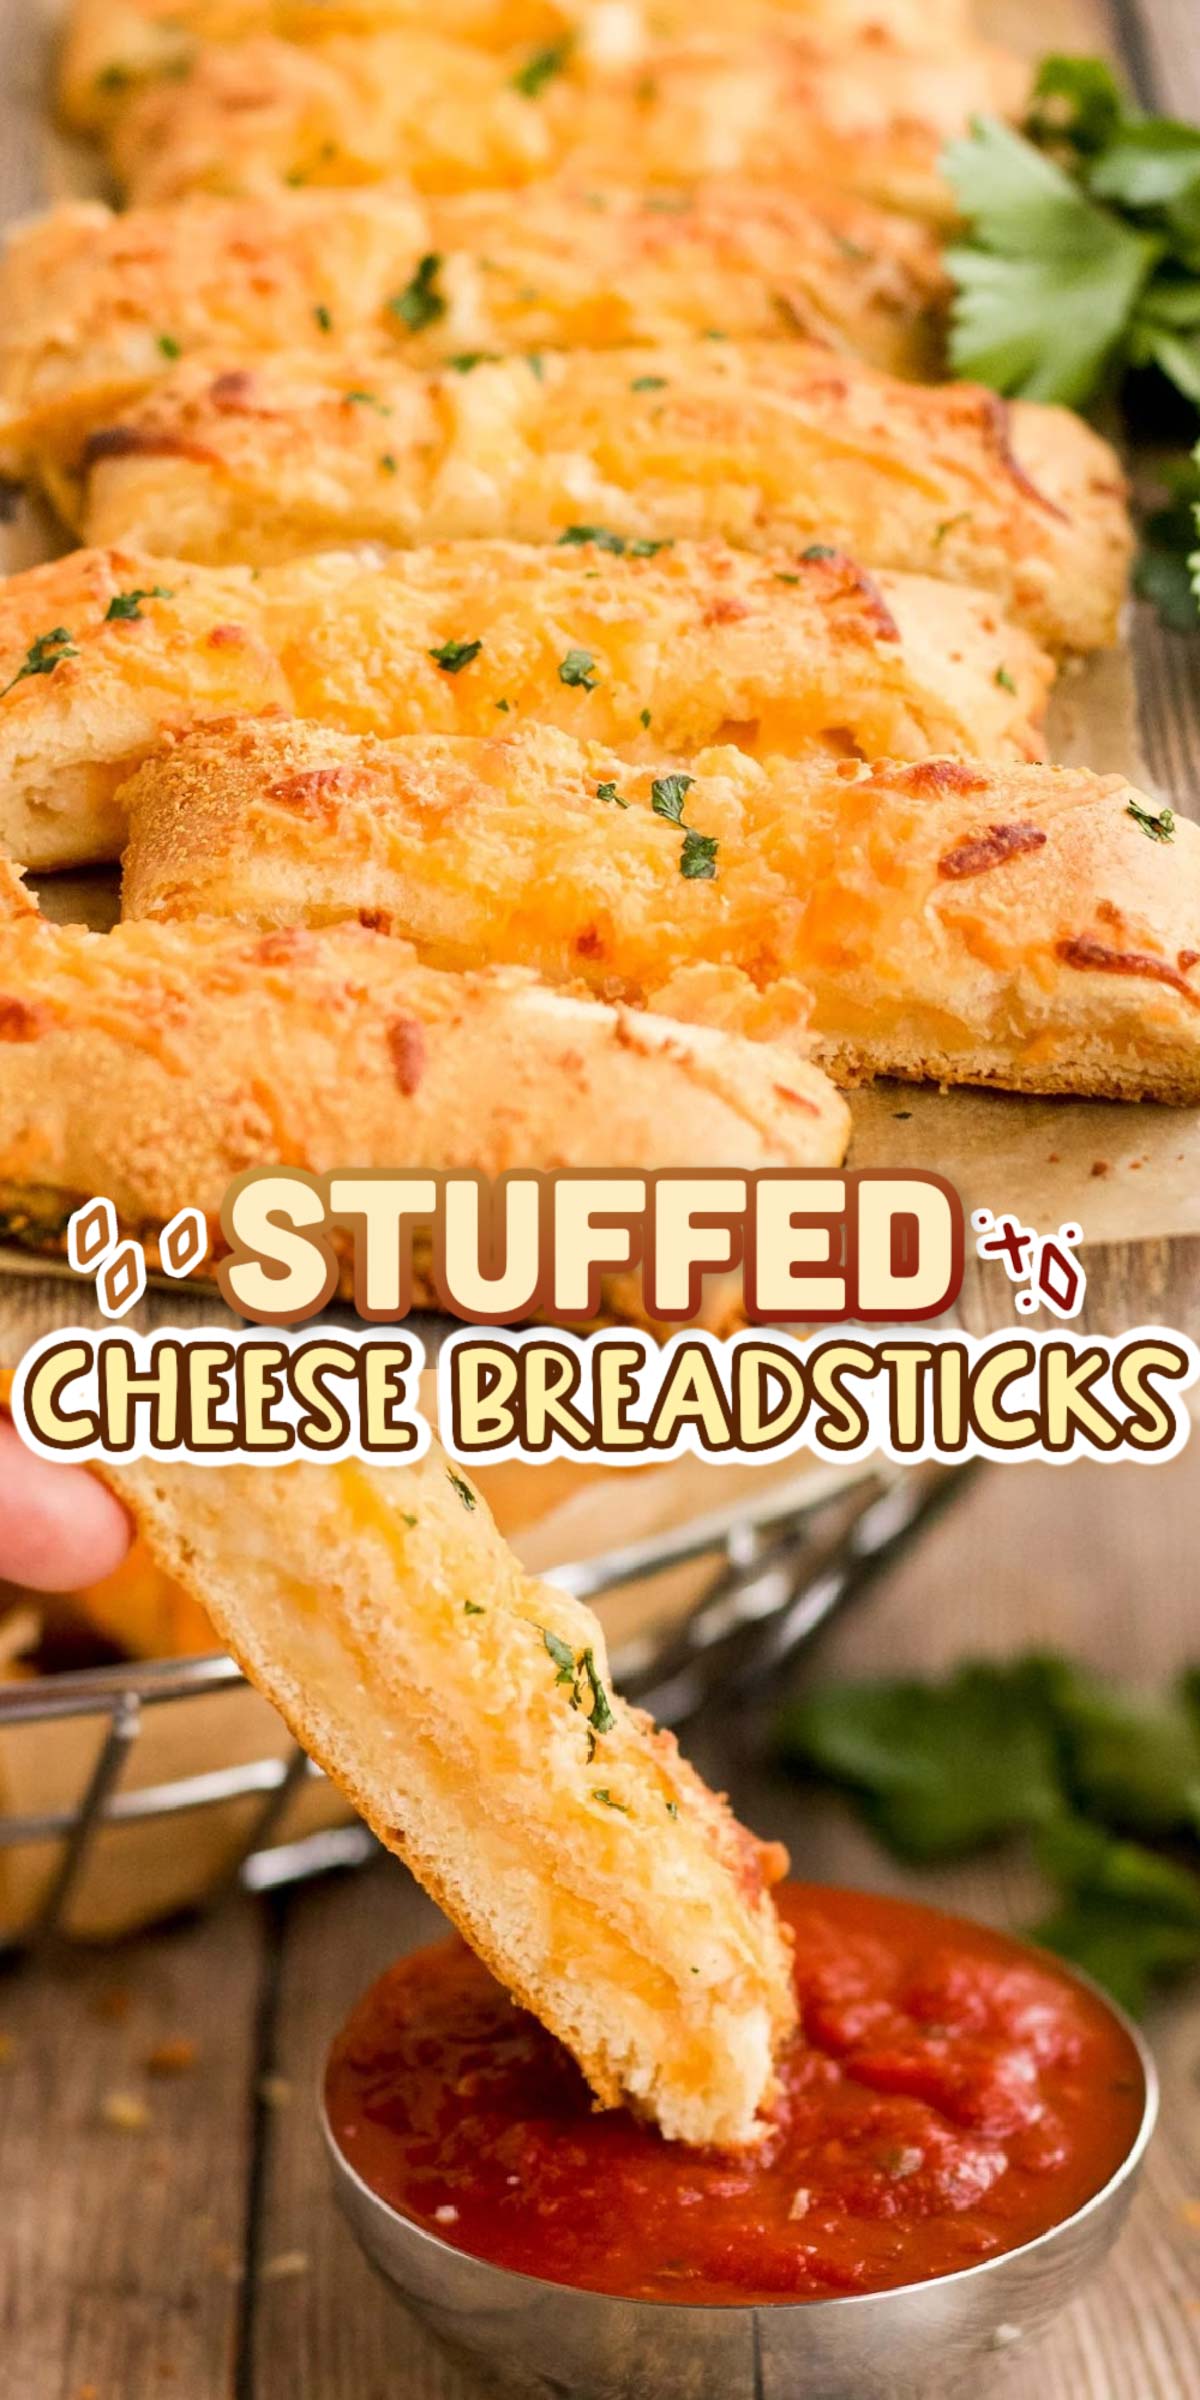 Cheese Breadsticks are ready in just 20 minutes using crescent roll dough, cheese, garlic salt, and parsley! Any cheese lover will appreciate these as an appetizer or served alongside their favorite pizza, soup, or pasta dish!  via @sugarandsoulco